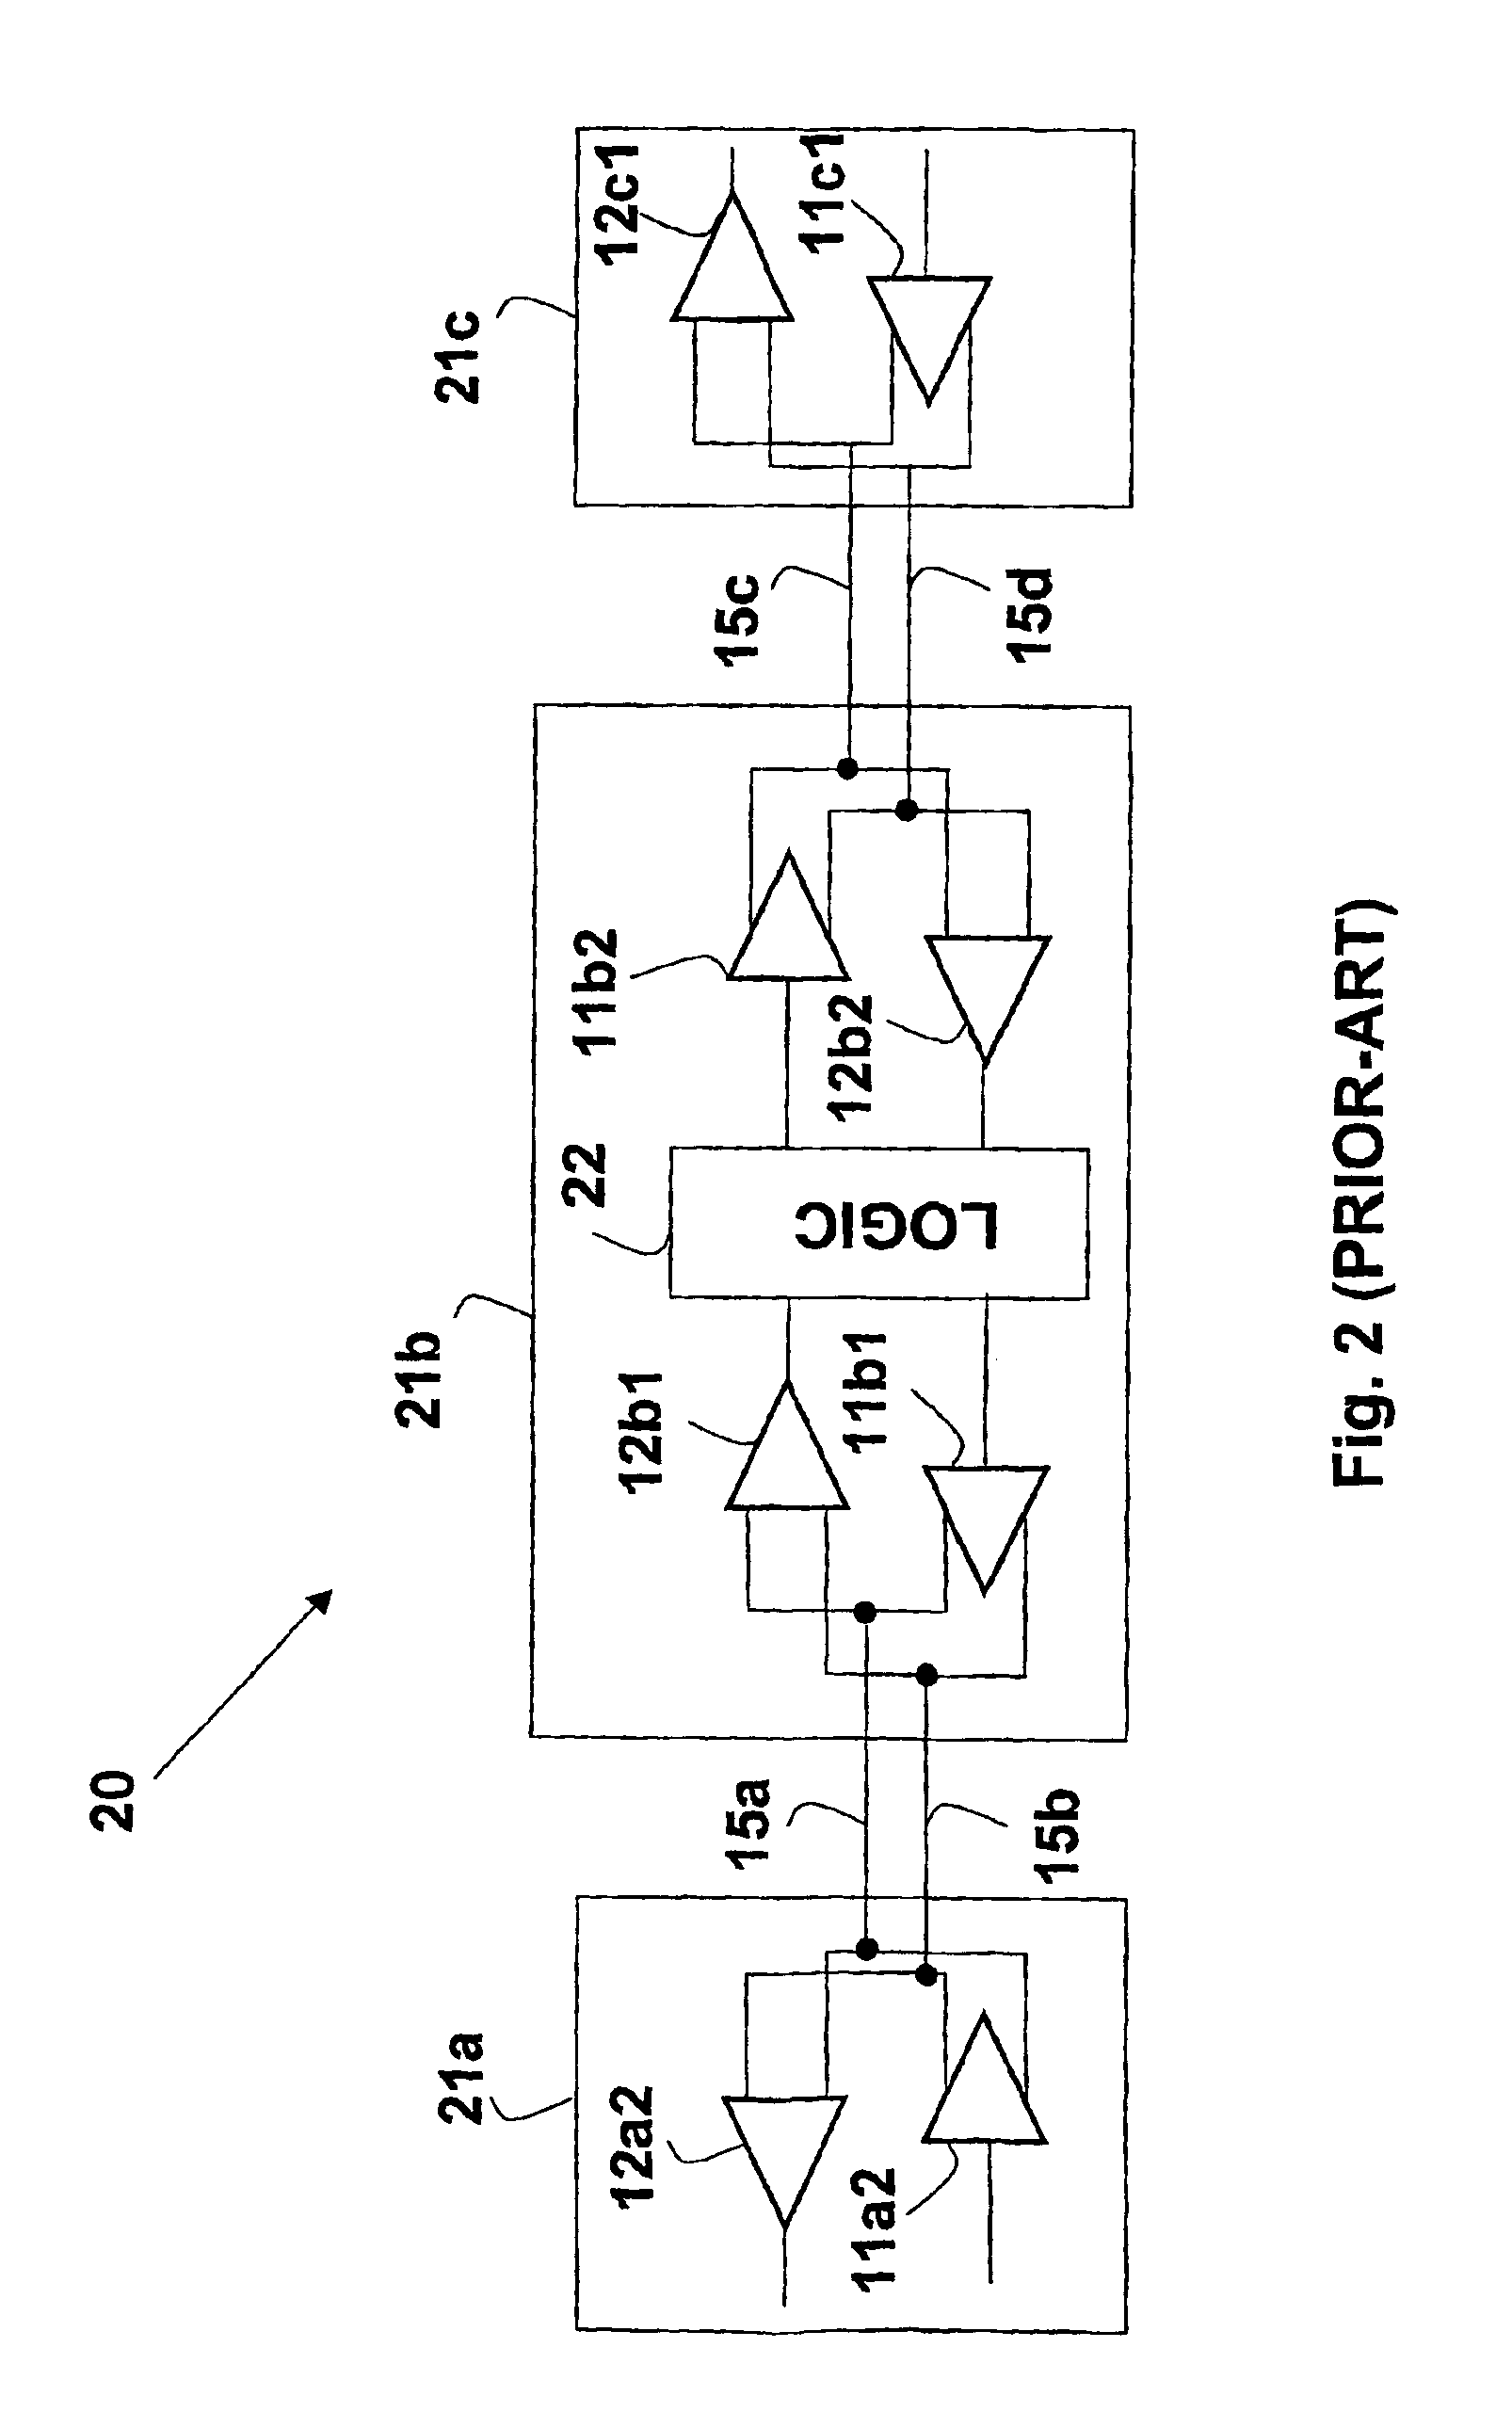 System and method for transmission-line termination by signal cancellation, and applications thereof